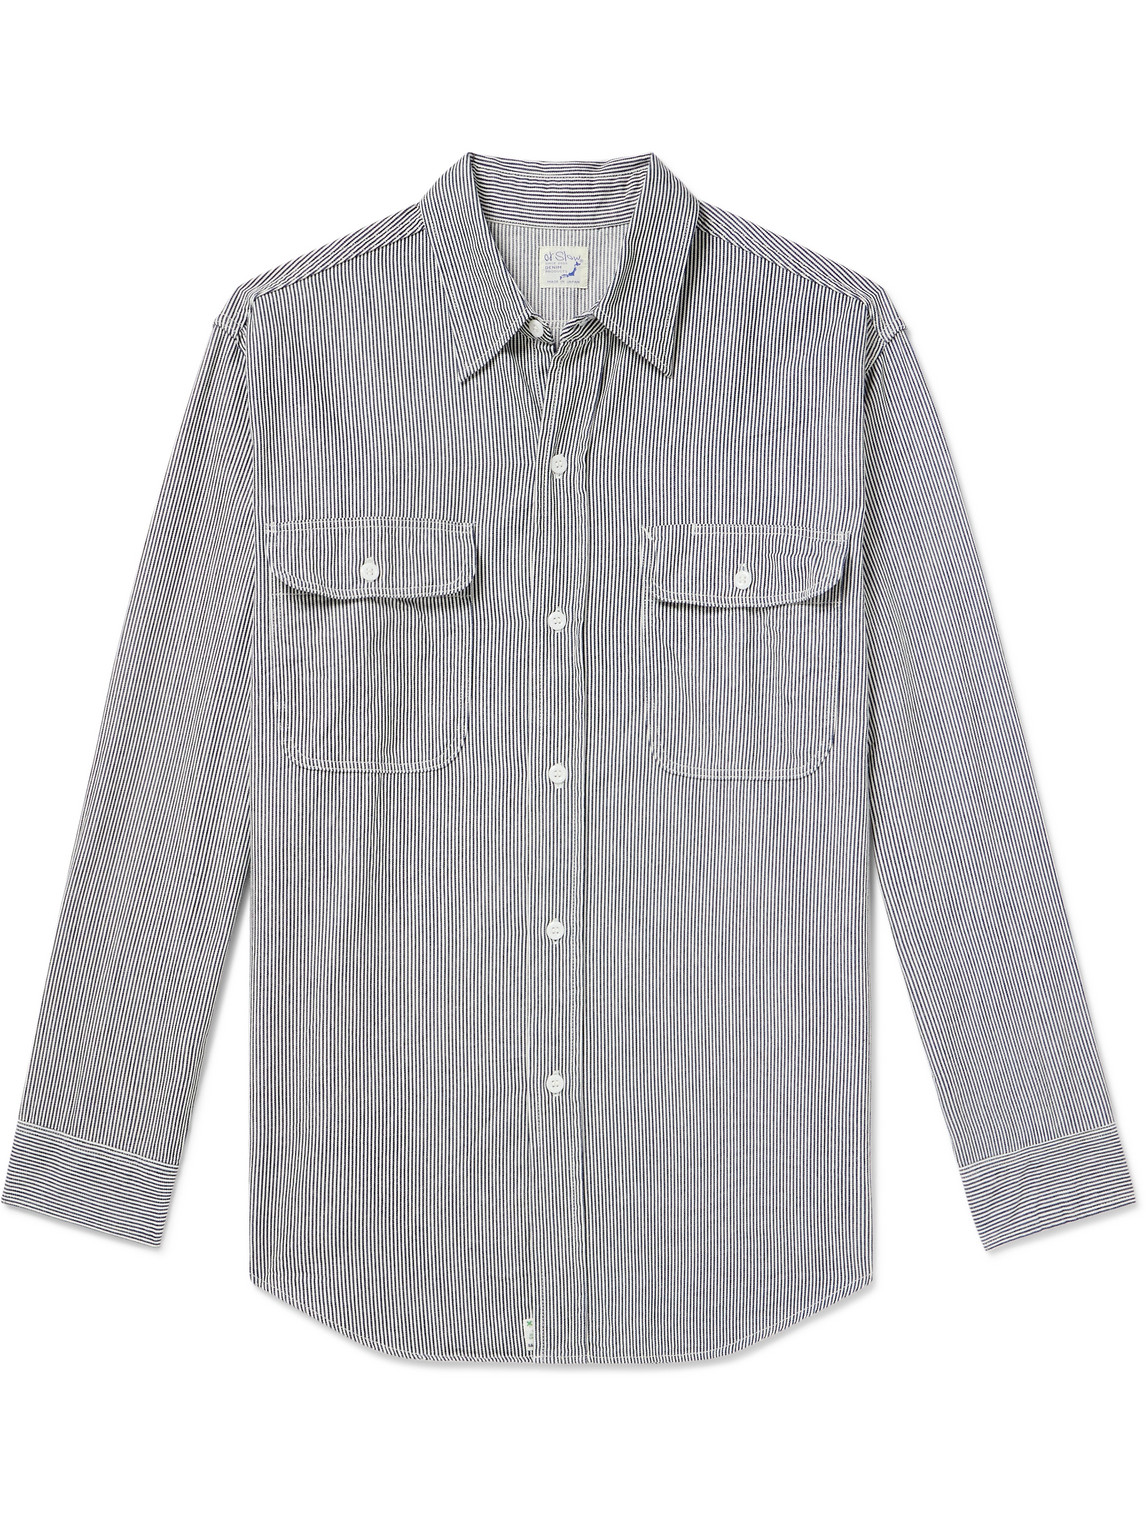 Orslow Striped Cotton Shirt In Grey